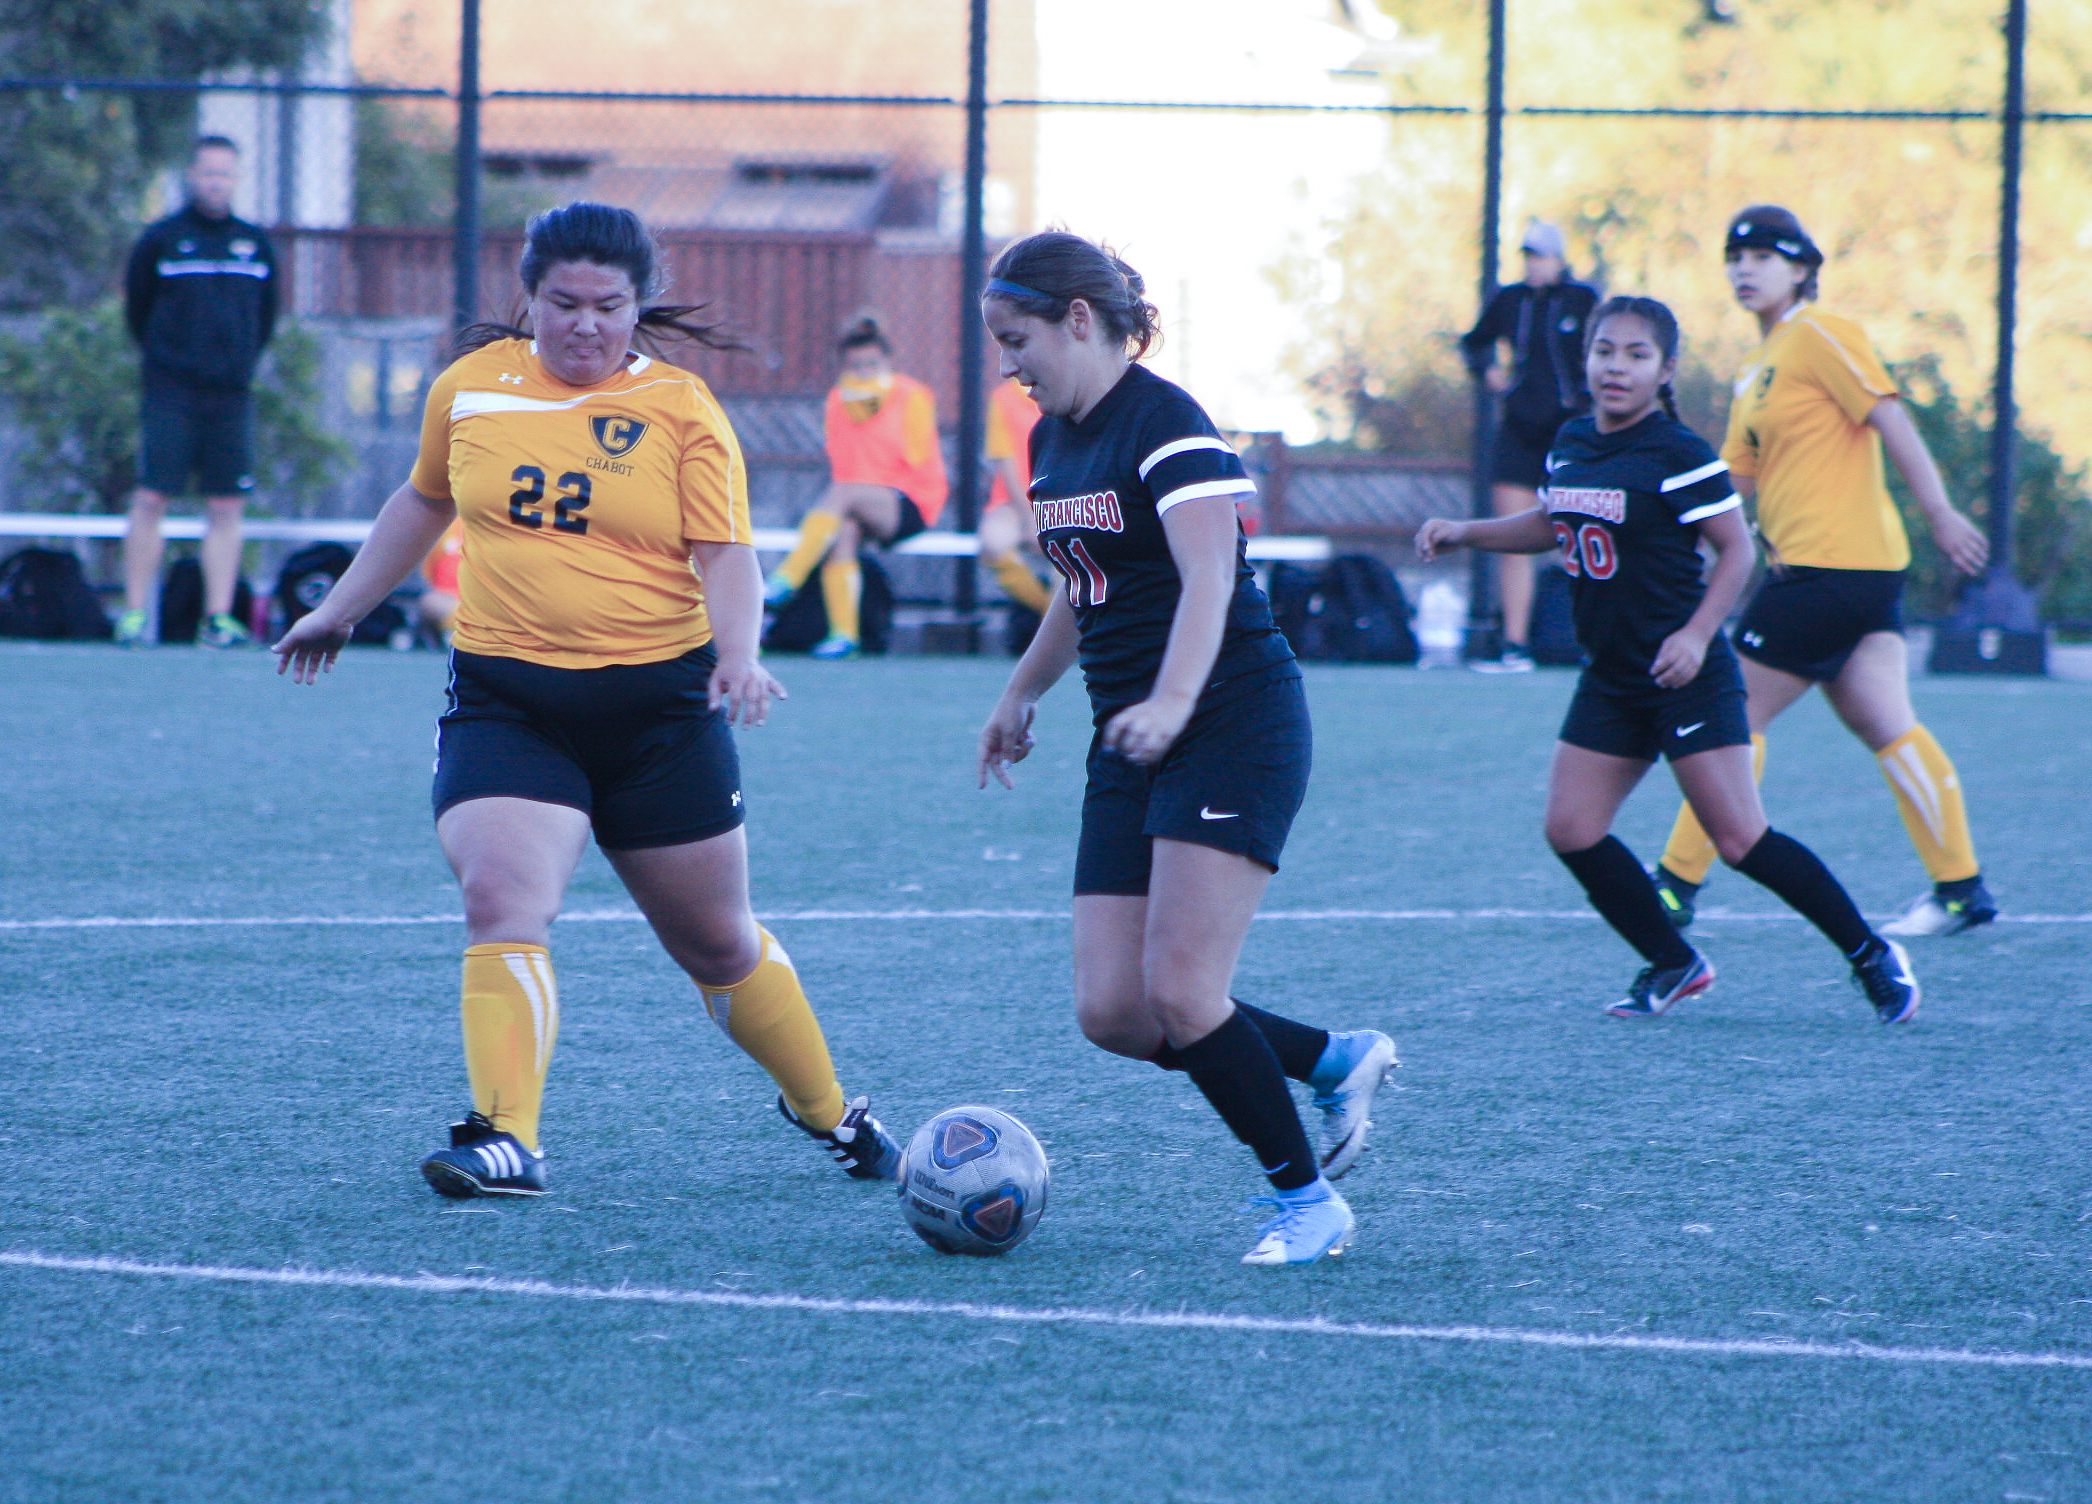 Arantxa Gomez Preito (#20) takes a midfield kick in the second half of the quarter, October 6, Tyesha Sams-Sims (#2) of Chabot College attempts to block her pass. San Francisco. (AP Photo/ Julia Fuller) 